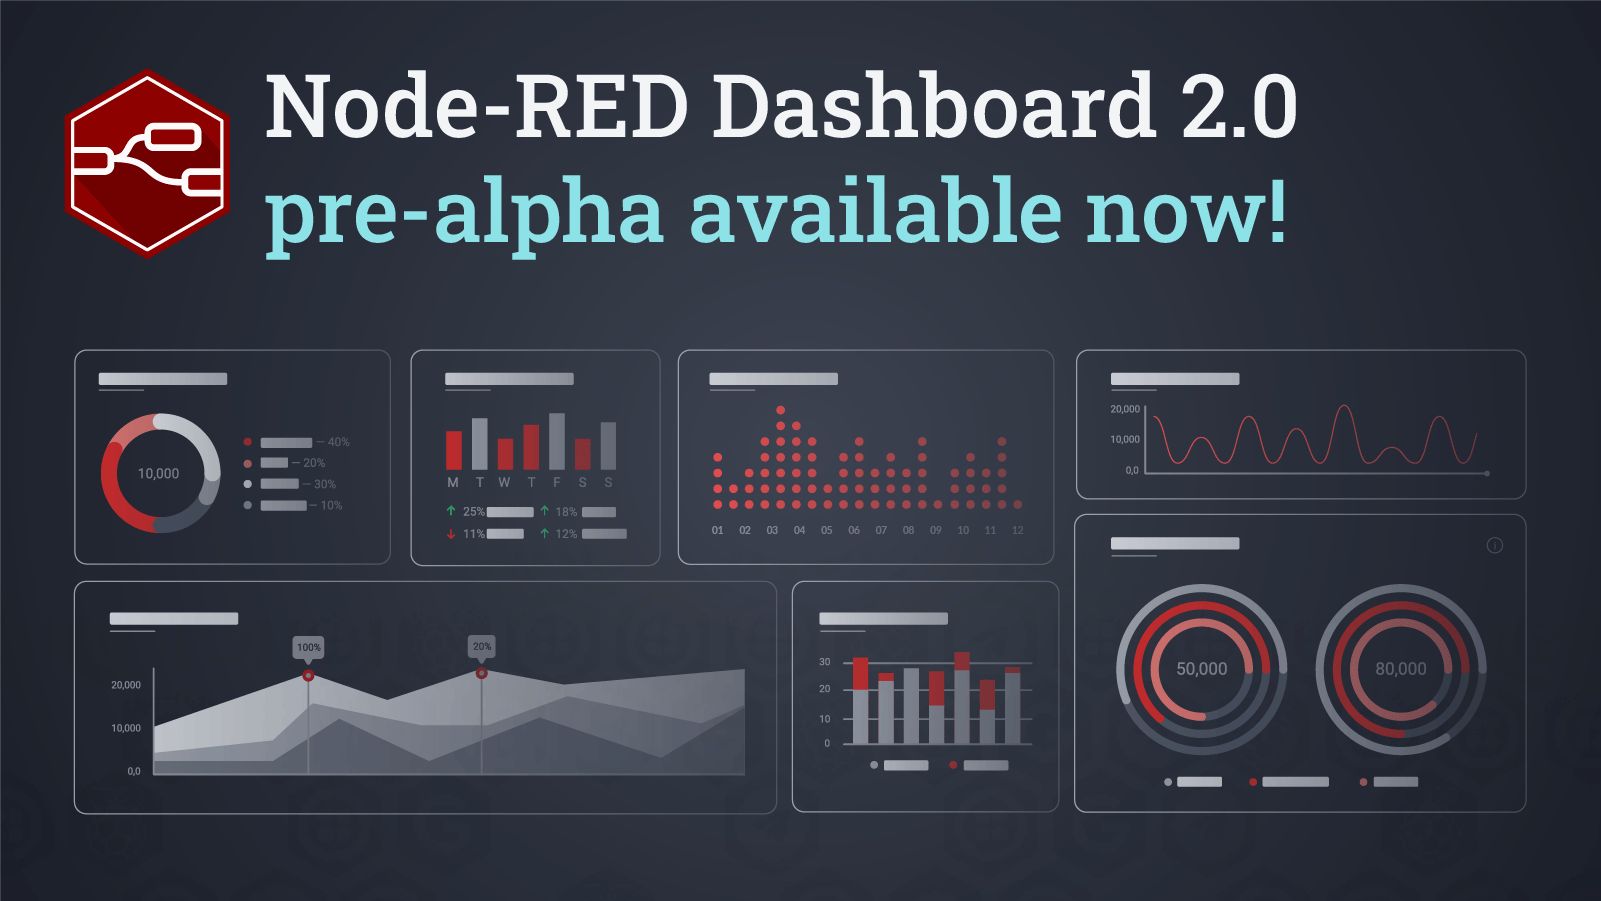 Image representing First Pre-Alpha Release of the new Node-RED Dashboard